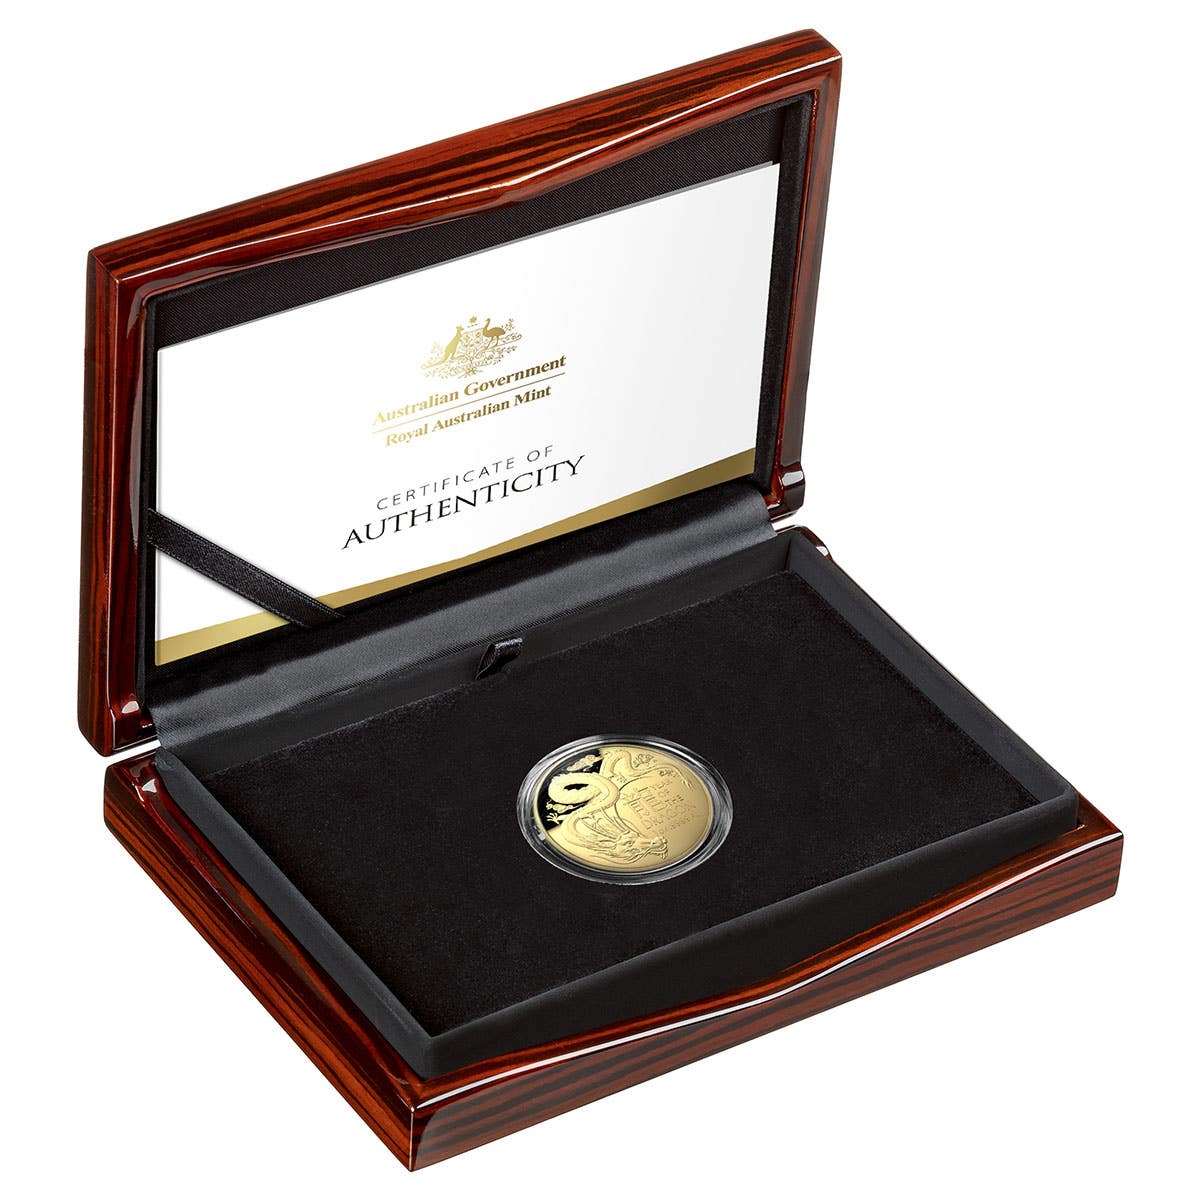 Year of the Dragon 2024 $100 Domed Gold Proof Coin